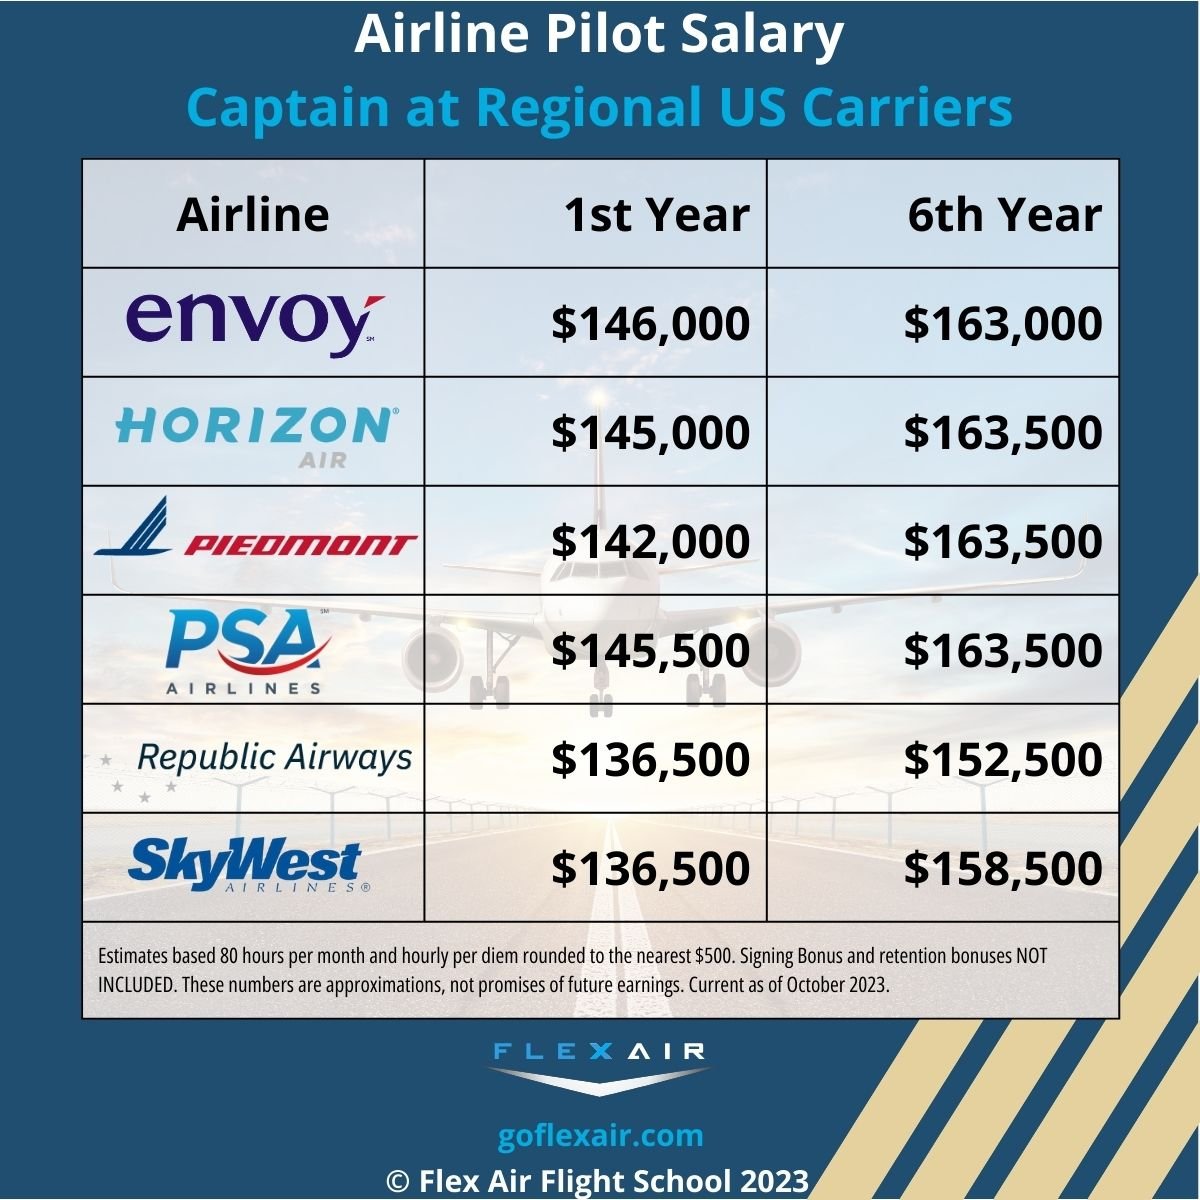 Airline Pilot Salary 2023: How Much do Pilots Make?